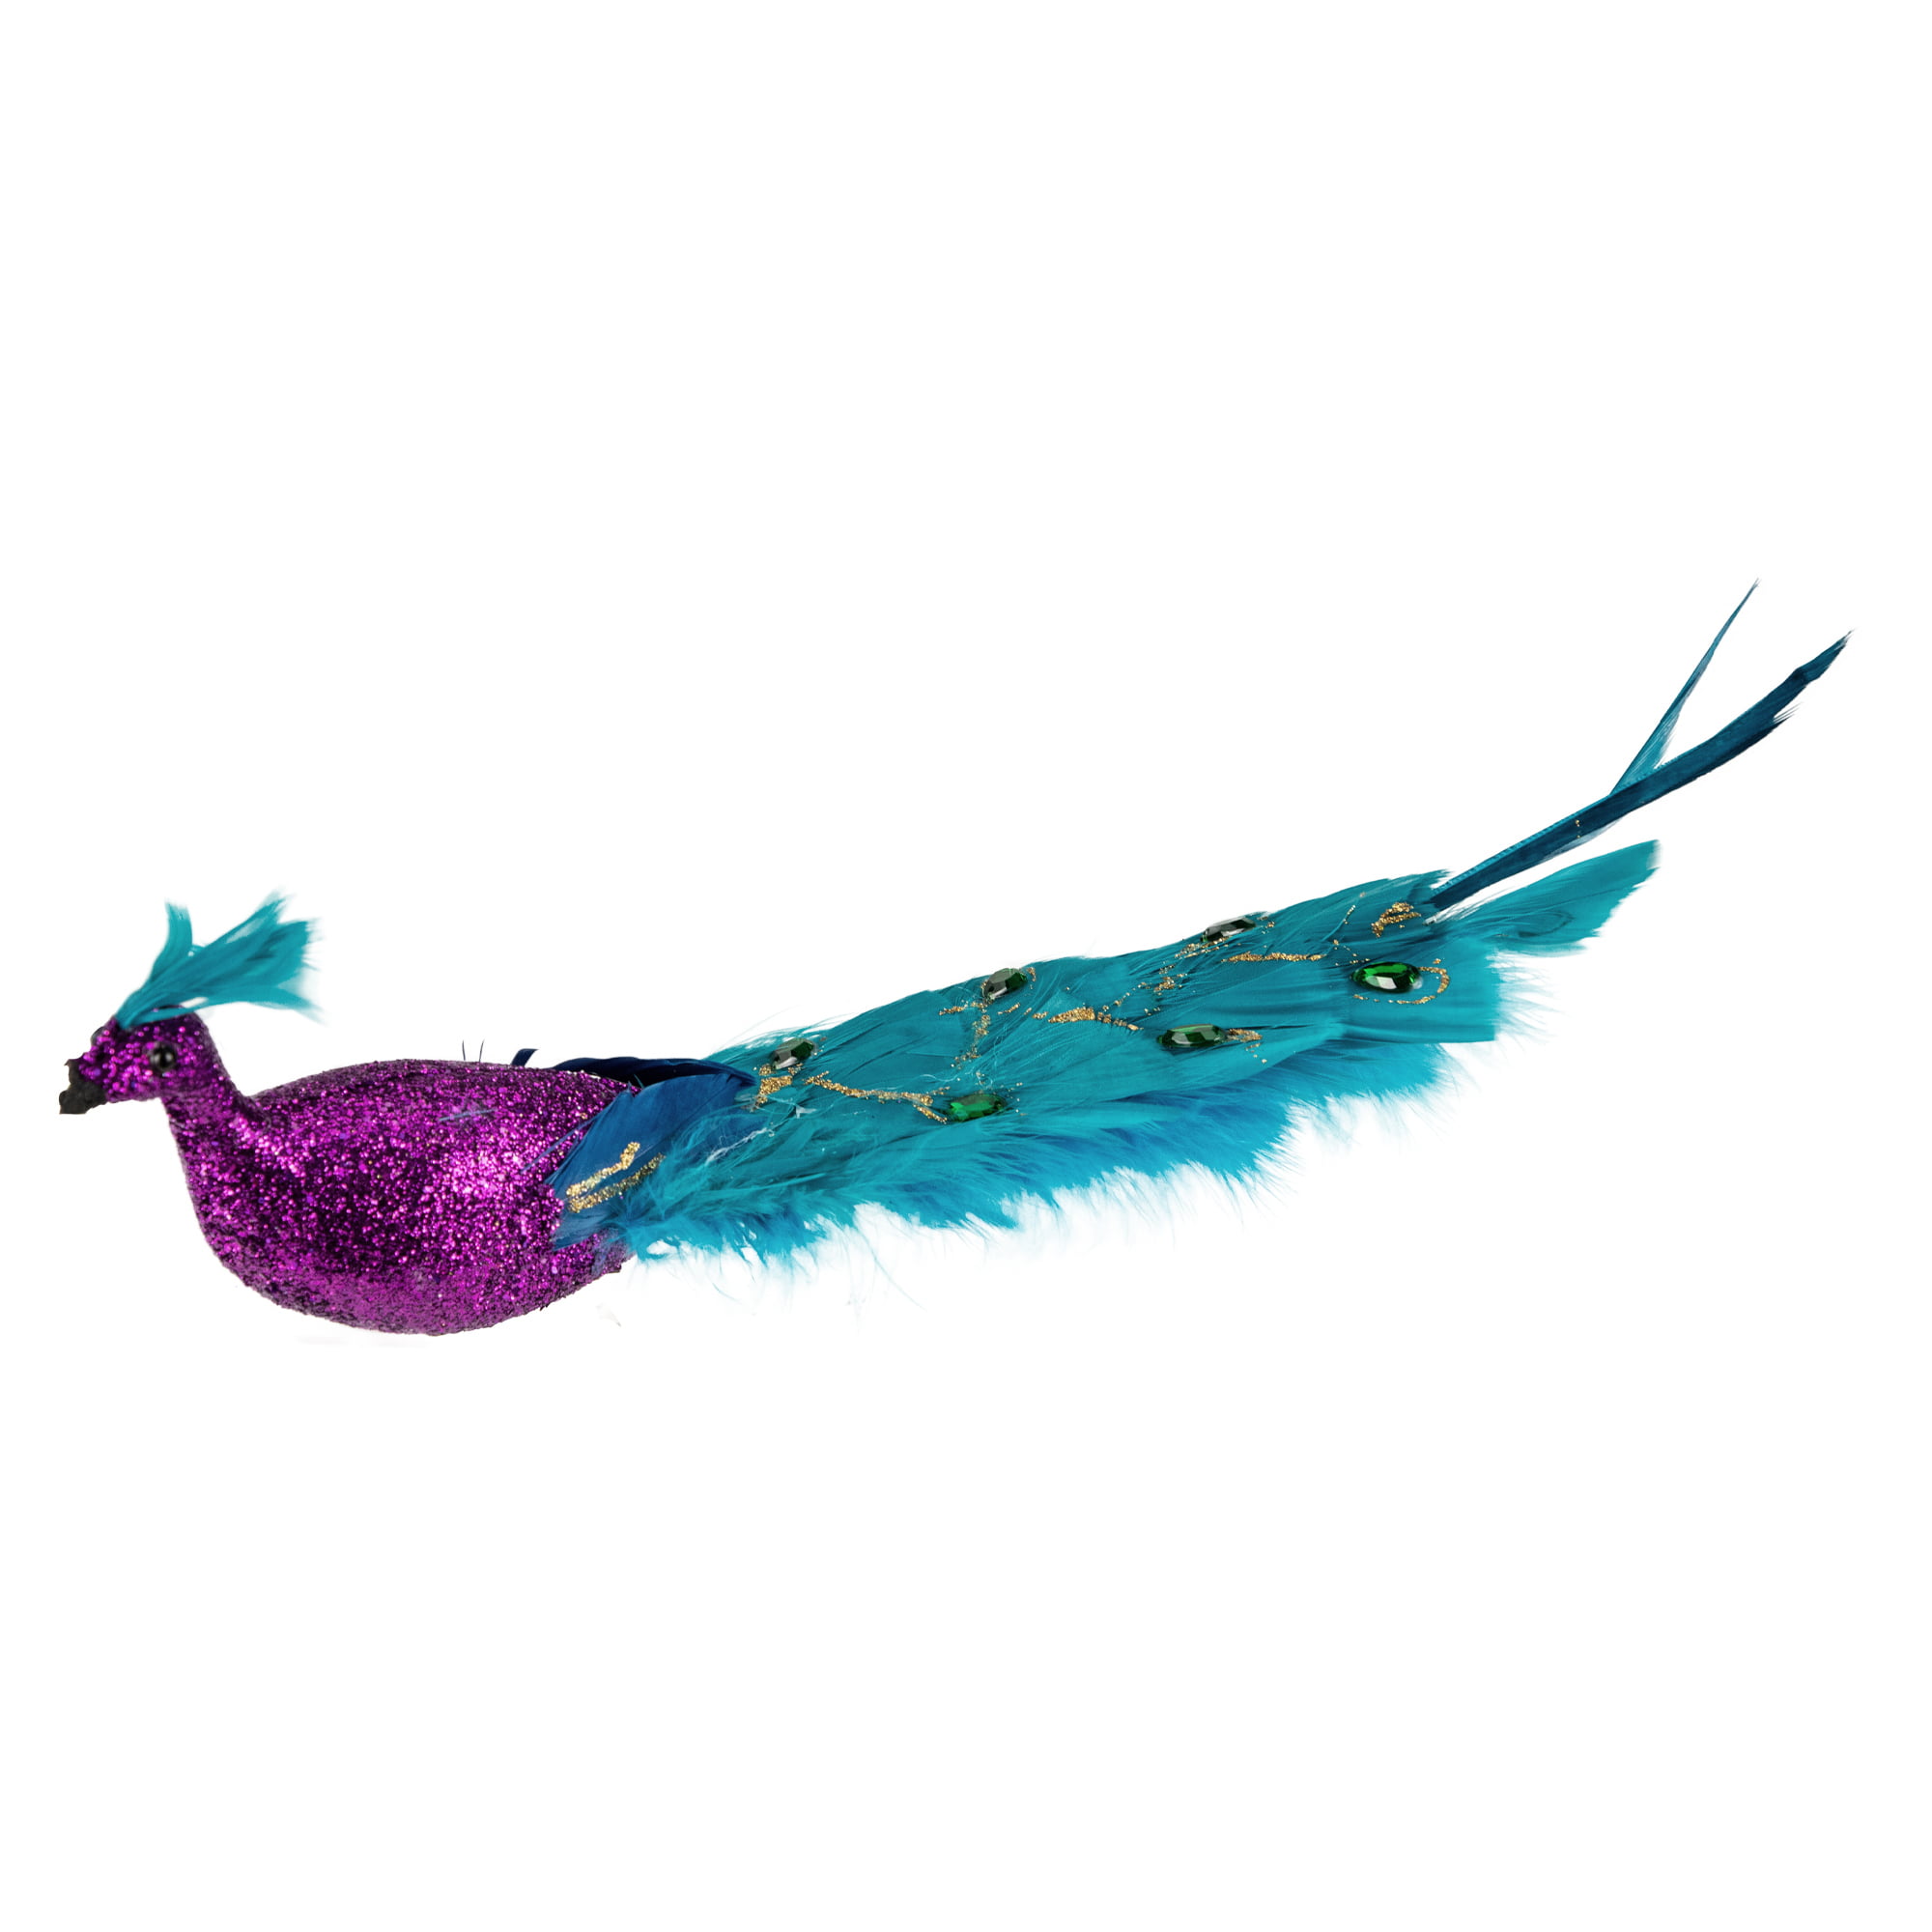 Handmade Clip-on set of 2 11 inch RED Feather/Glitter Peacock Bird 